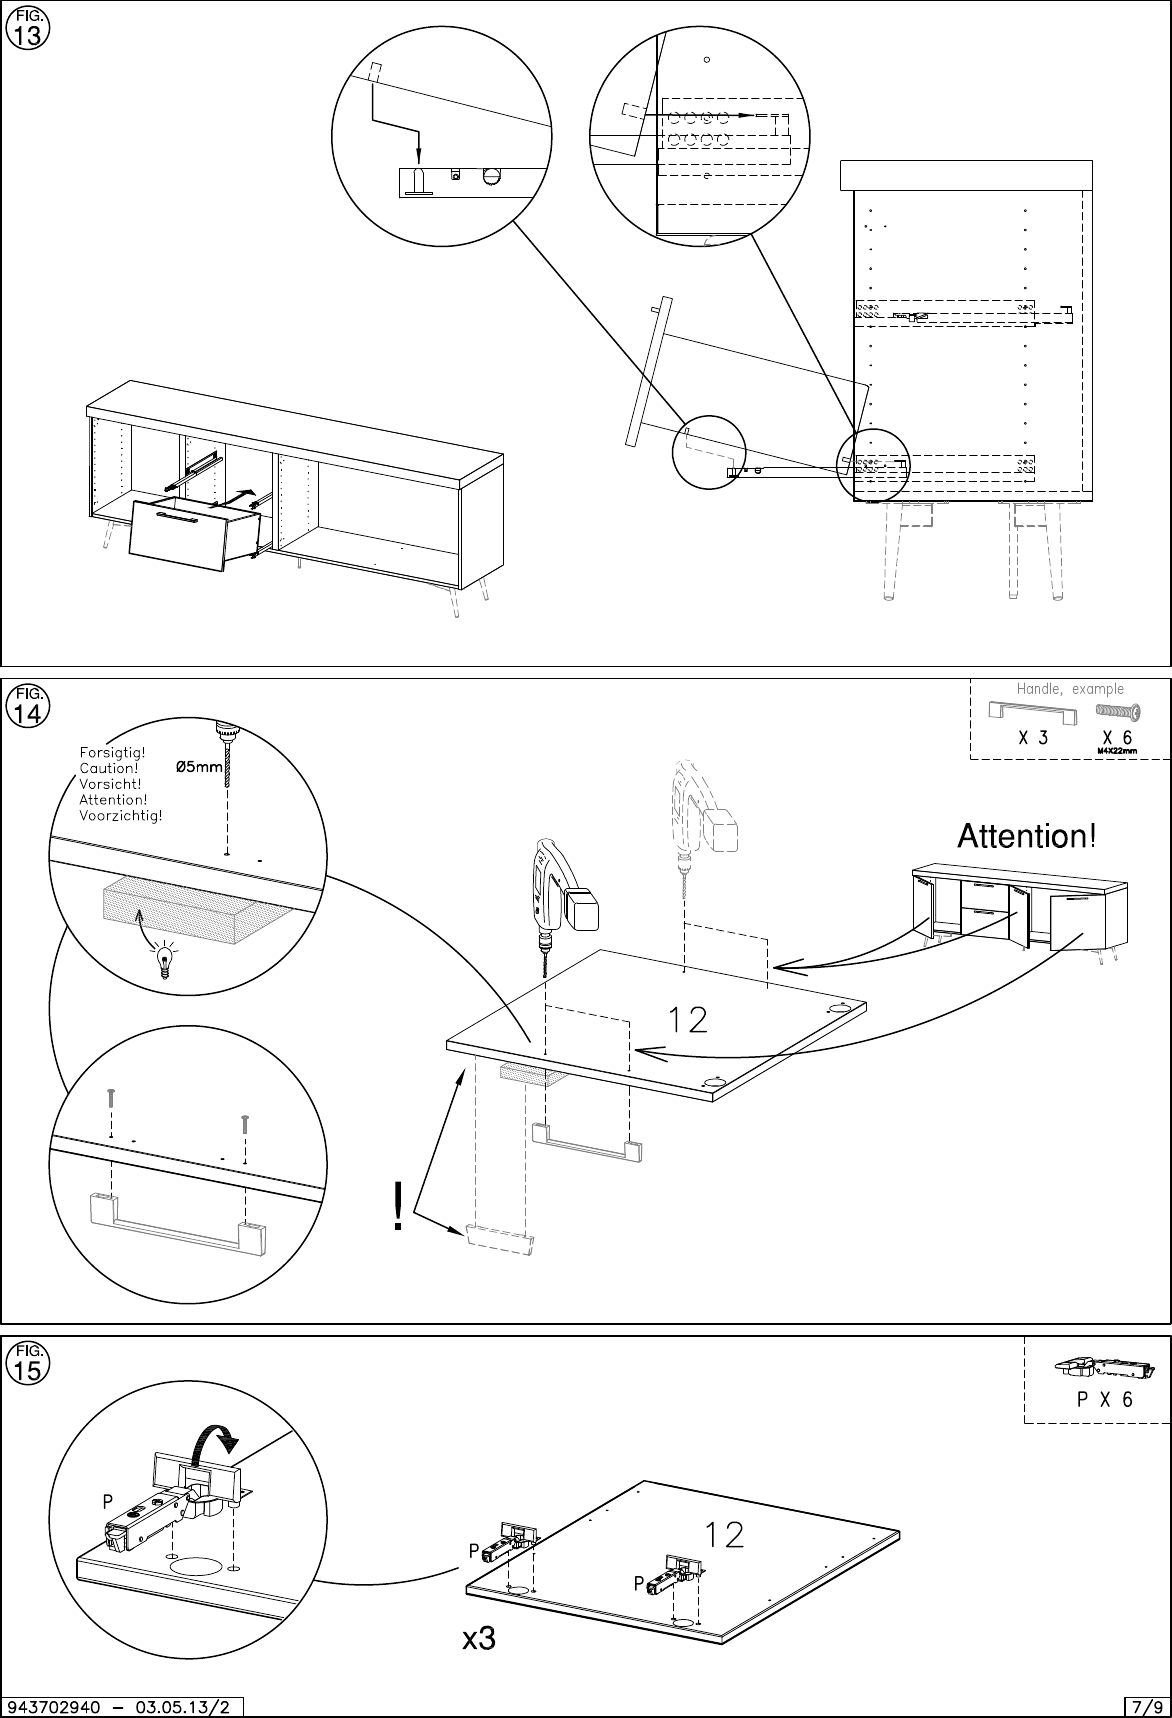 Page 7 of 9 - Boconcept Boconcept--2940-Assembly-Instruction B:\DK_PTA_Share\Inventor Ation\_AI,  & Comb\370 - Occa\943702940_v2_10 Layout1